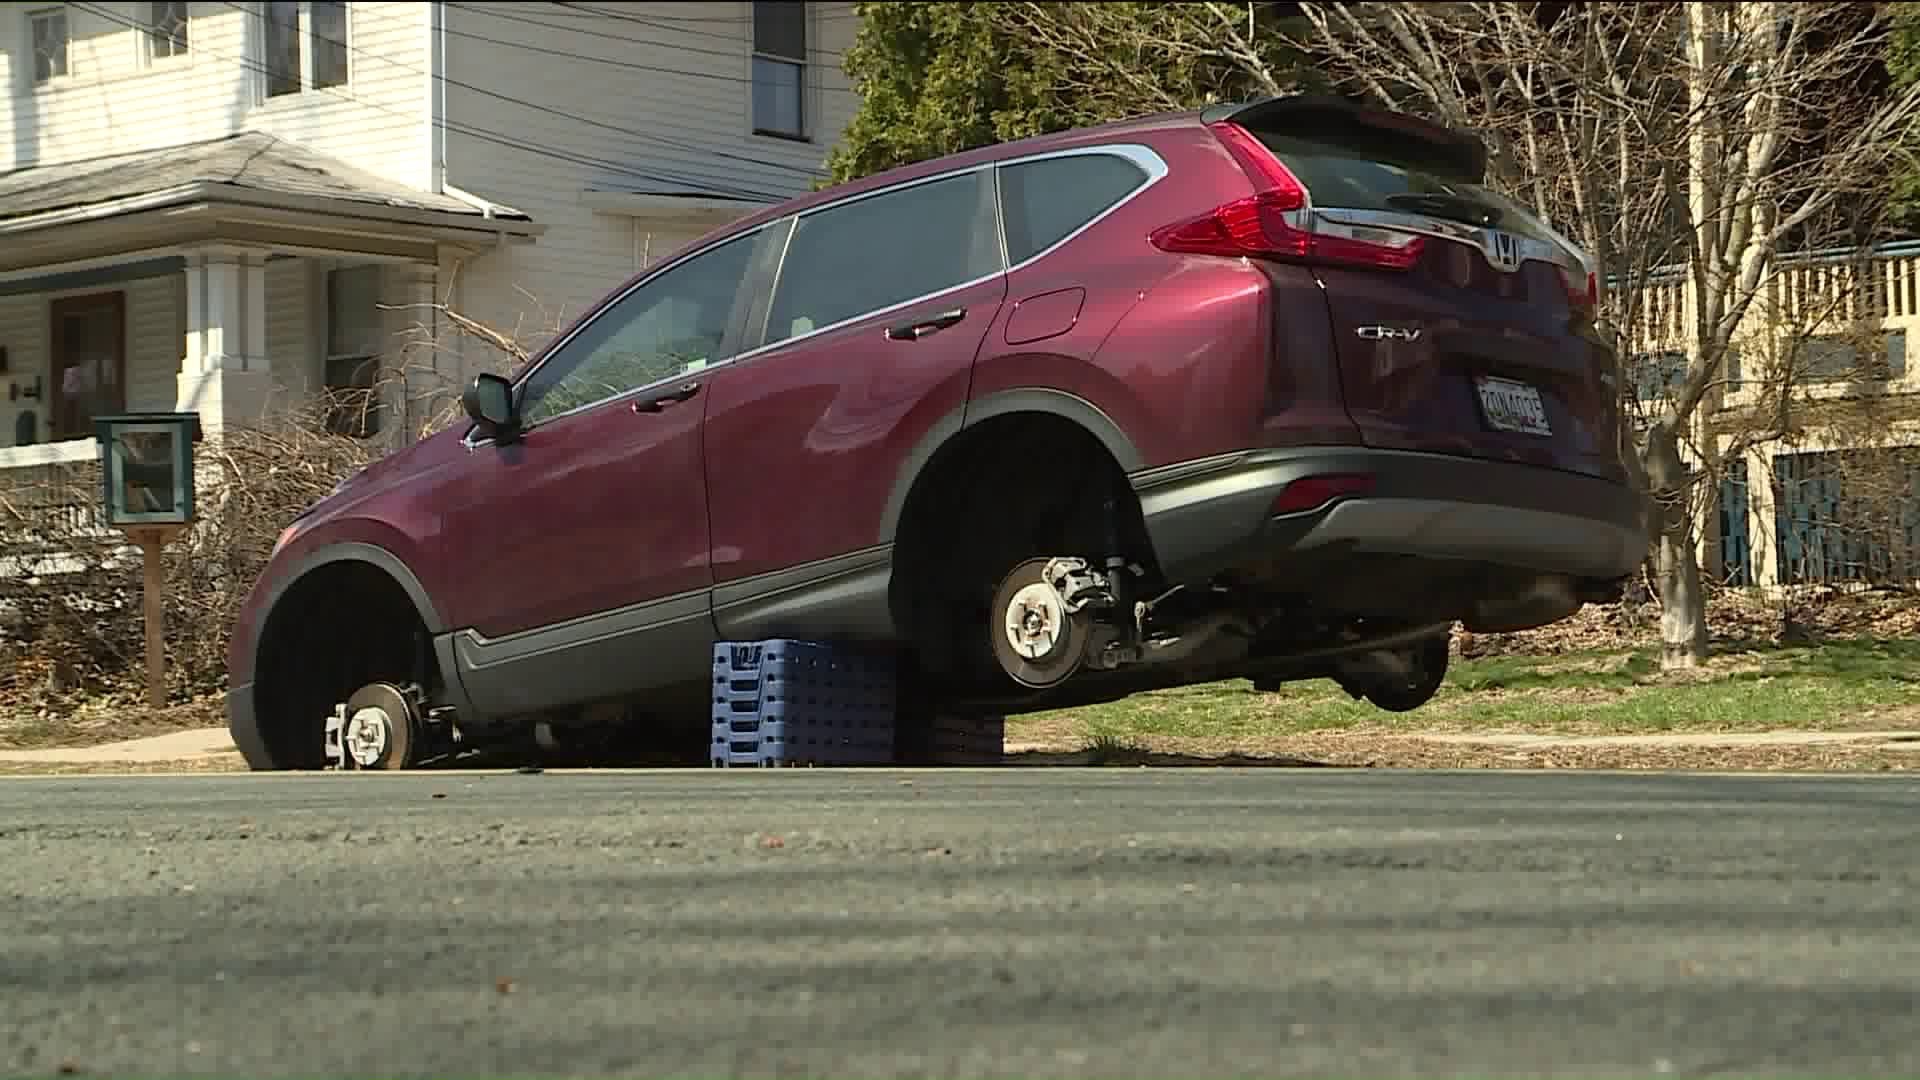 Residents dealing with wheel thefts